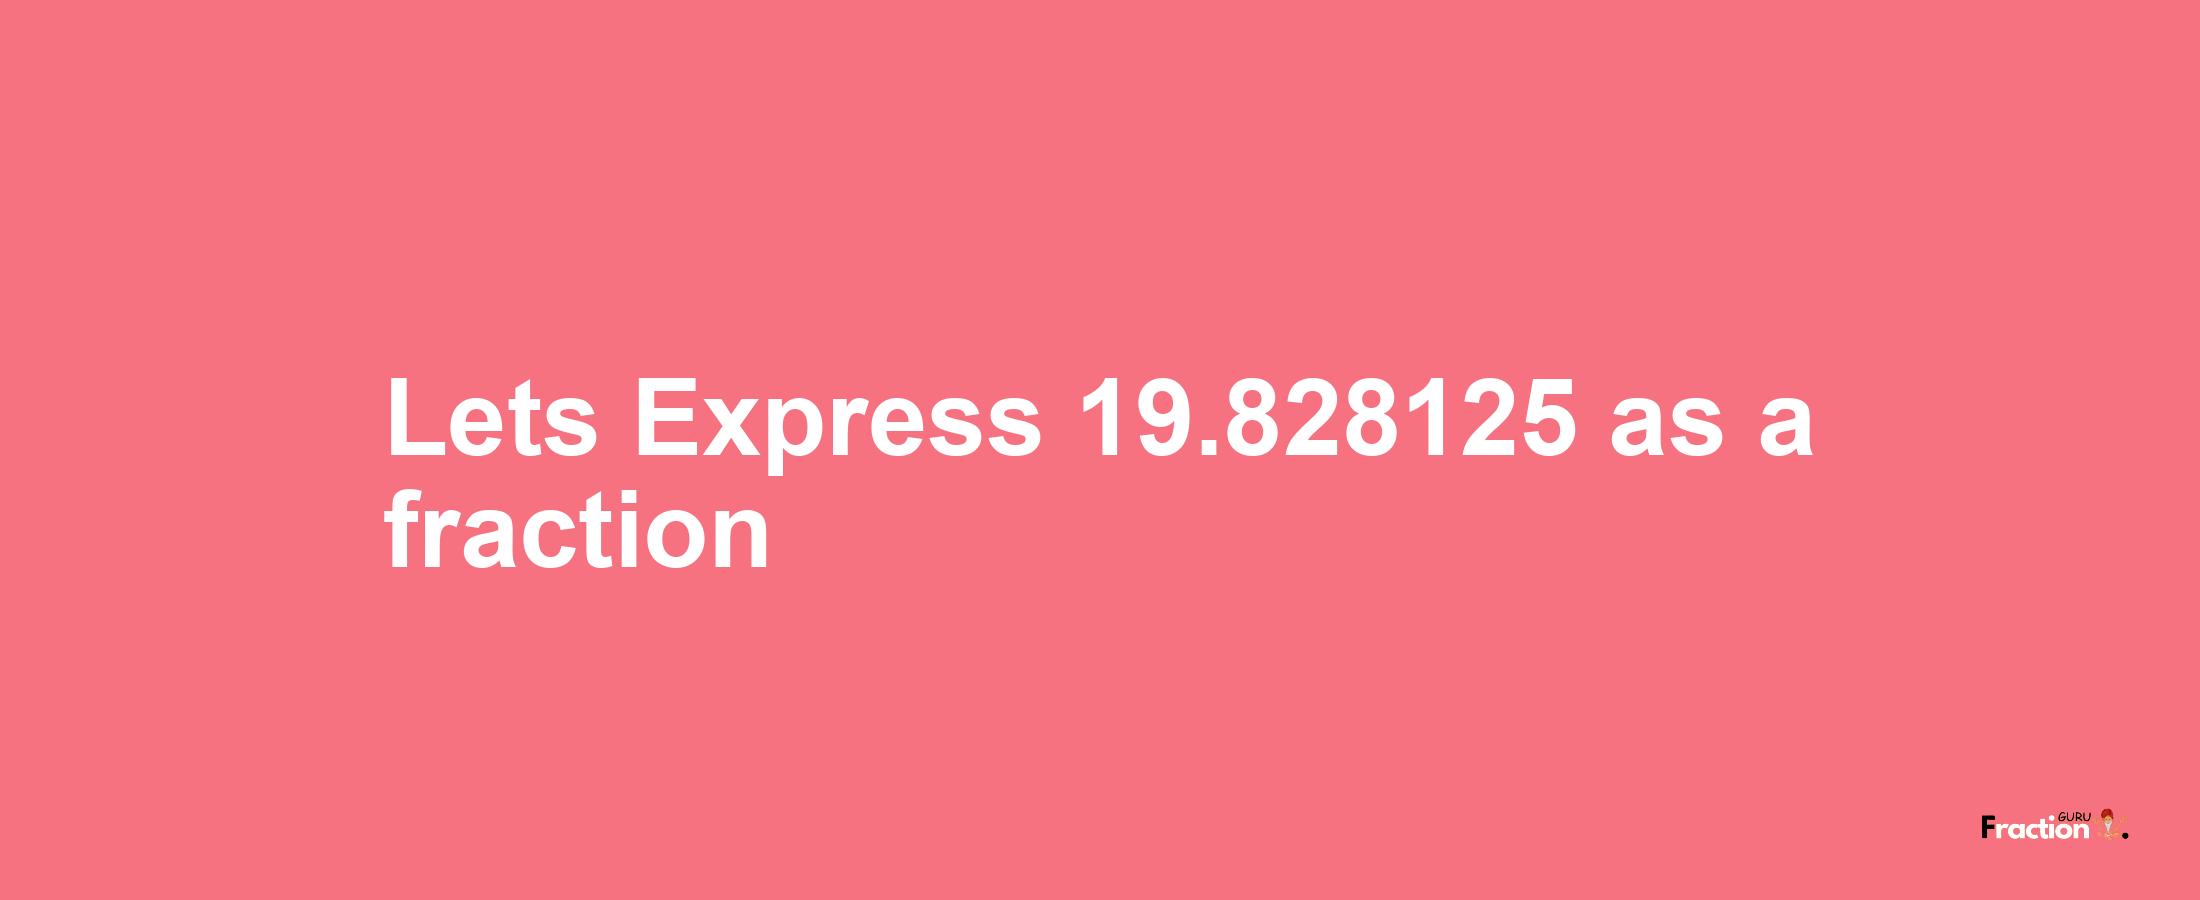 Lets Express 19.828125 as afraction